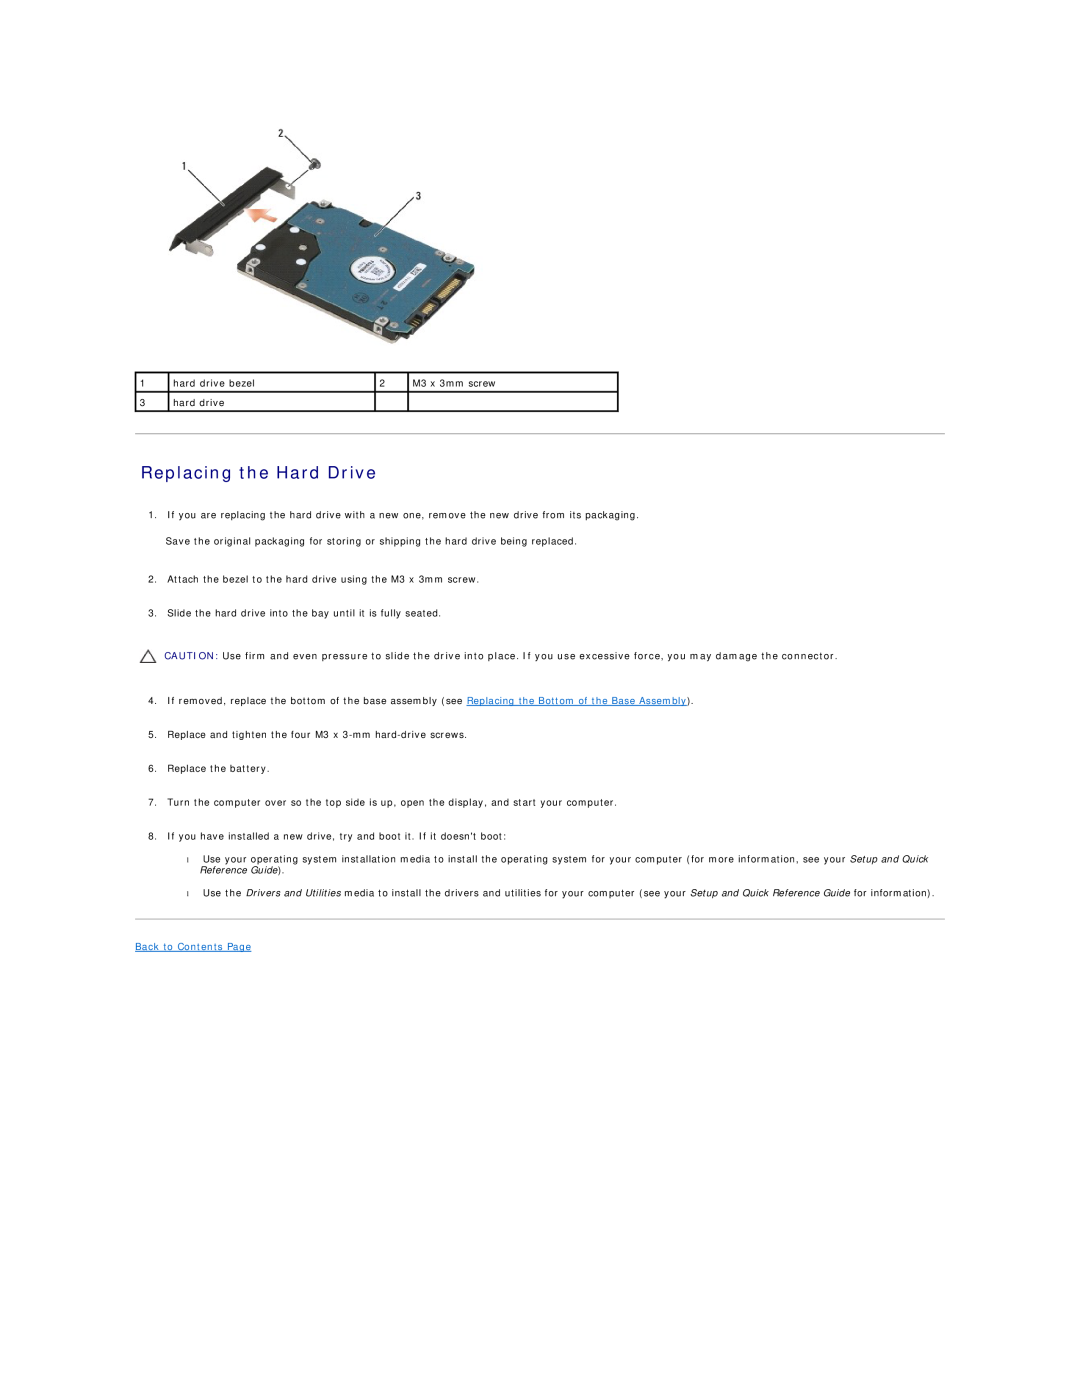 Dell E6500 manual Replacing the Hard Drive, Back to Contents Page 